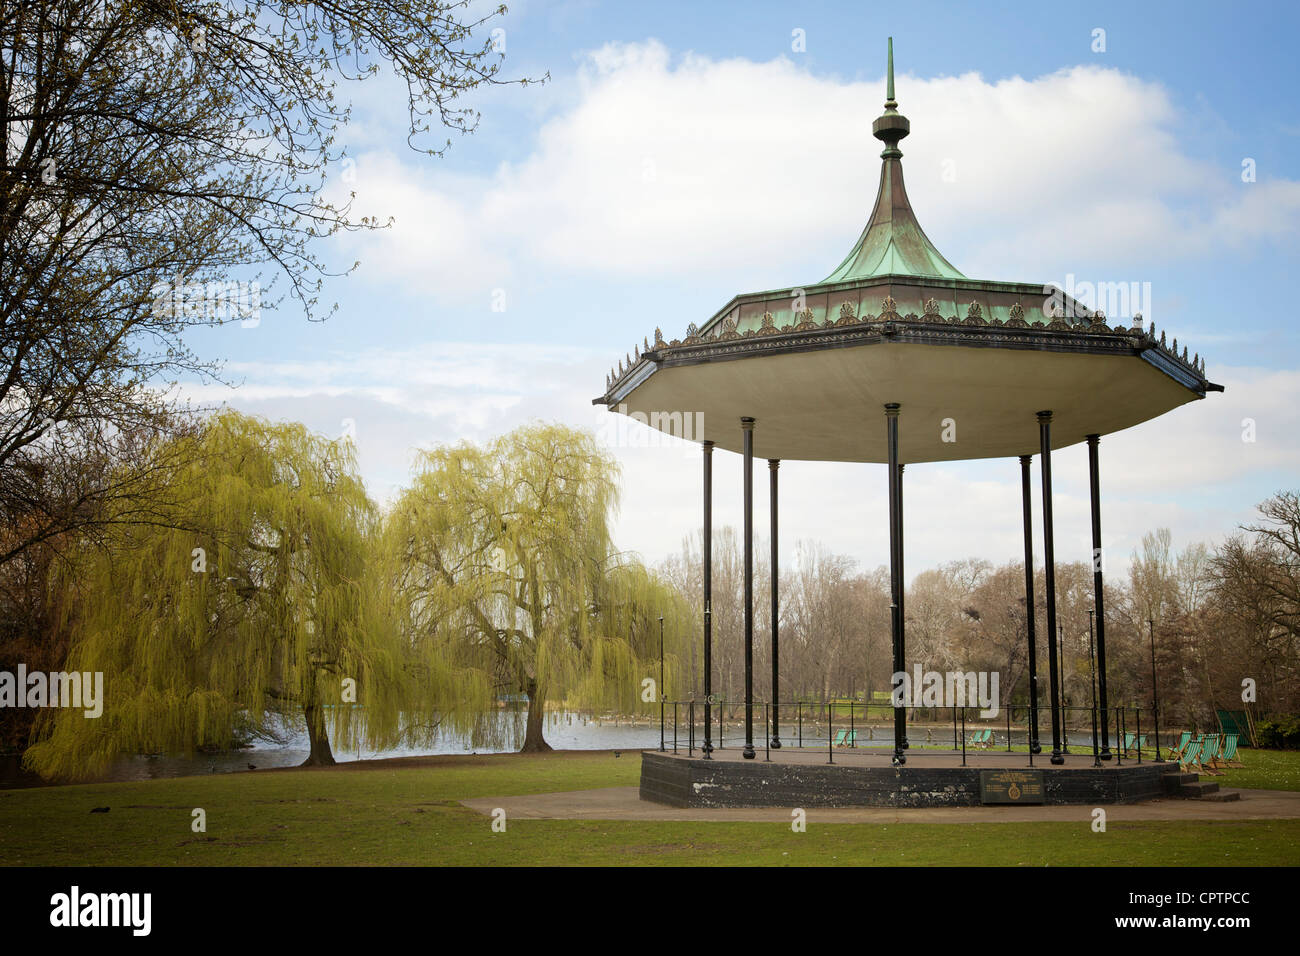 The bandstand at Regent's Park, London, UK. Stock Photo